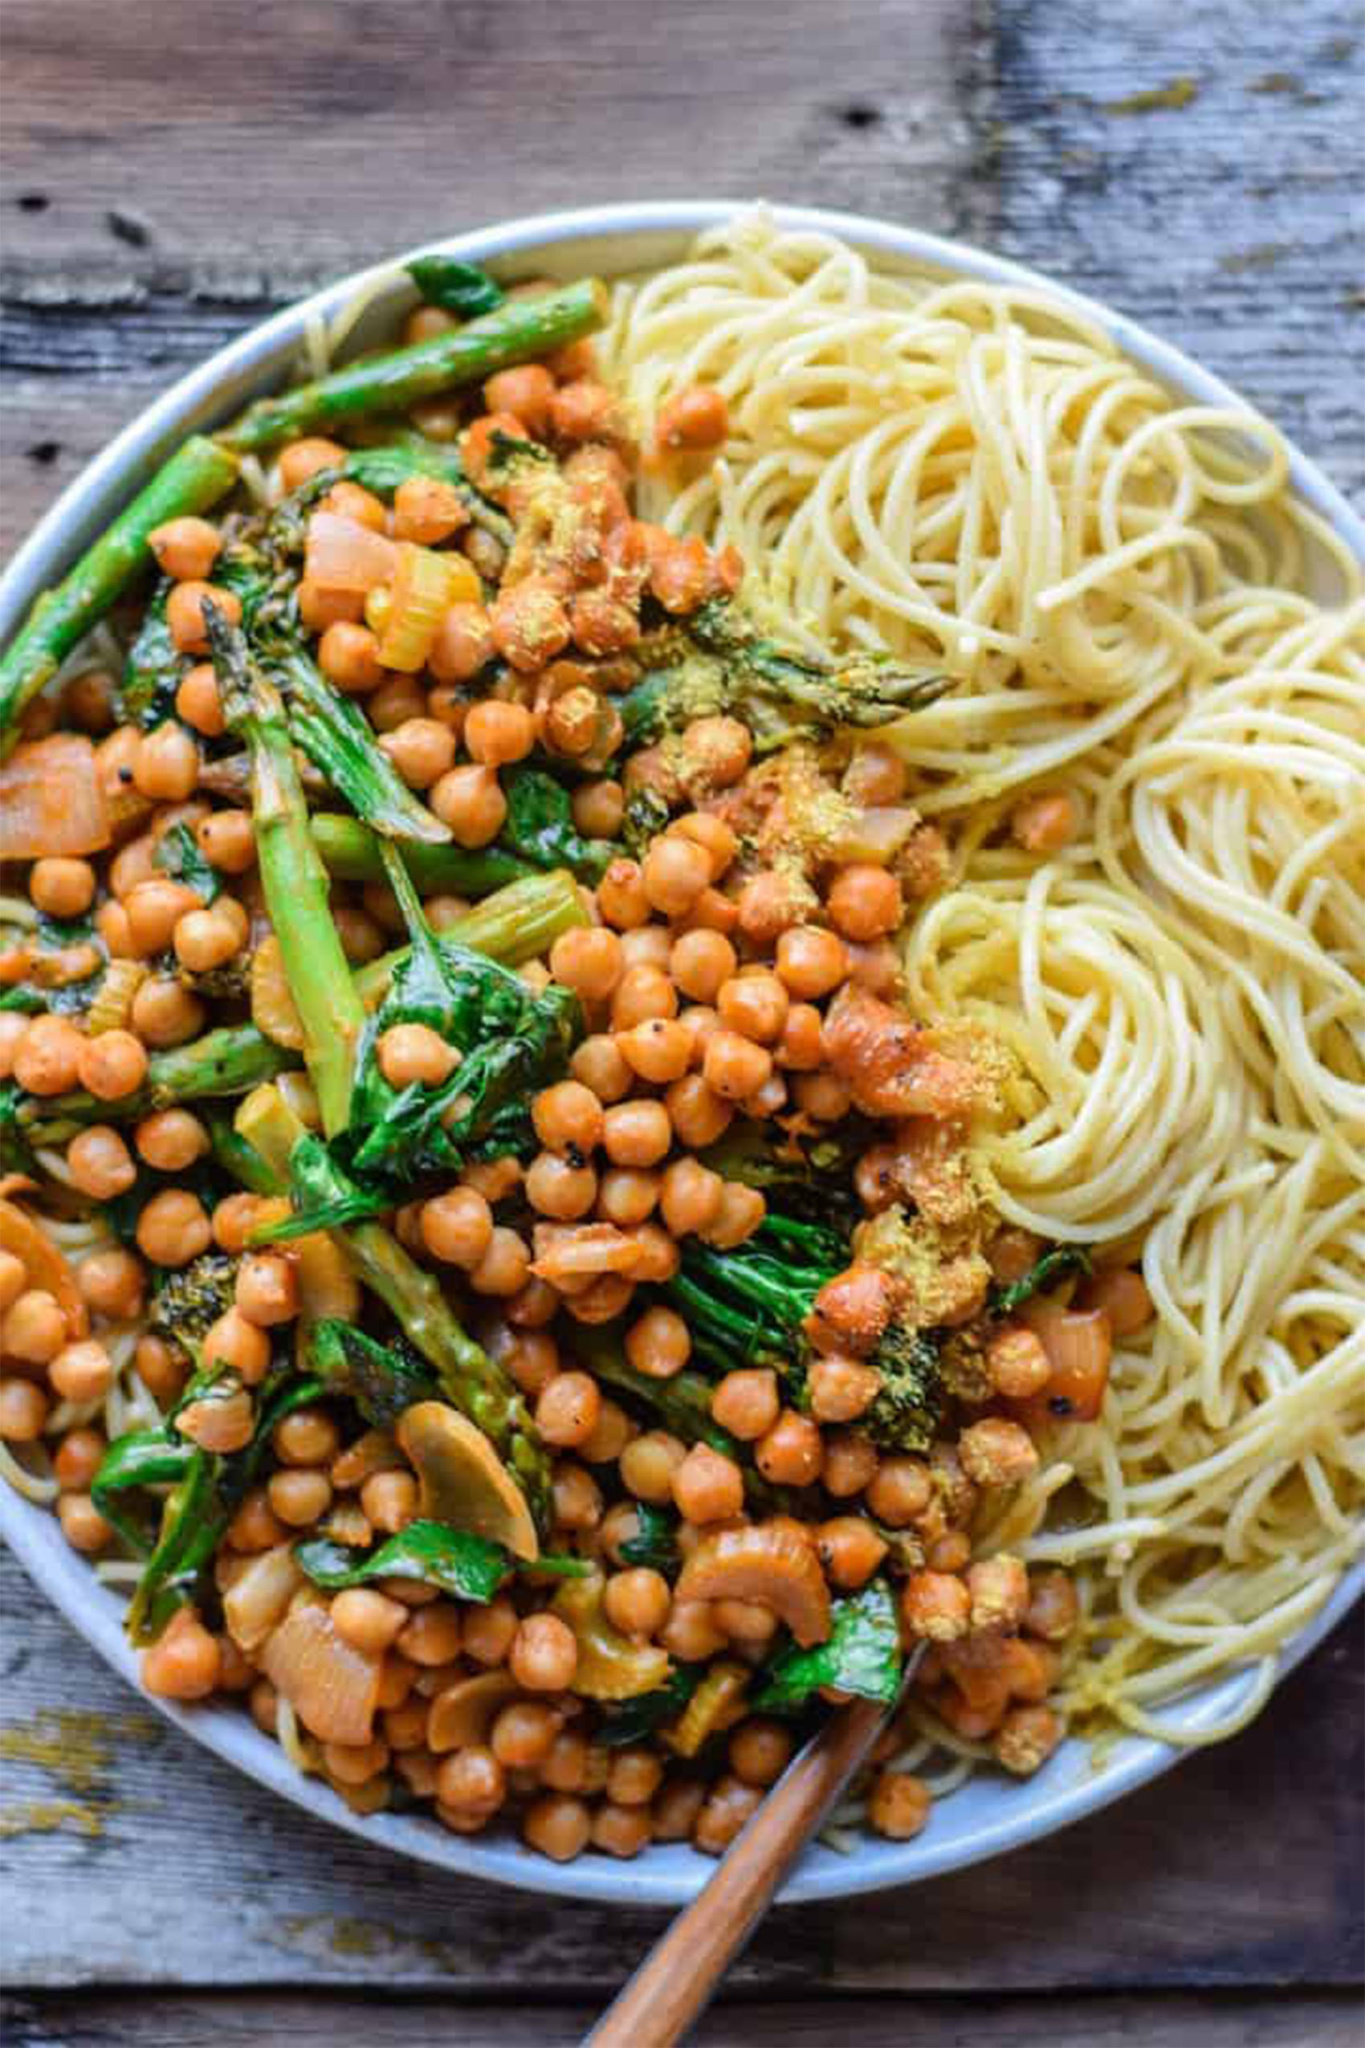 25 Vegan Chickpea Recipes Healthy Plantbased Meals 21 1365x2048 